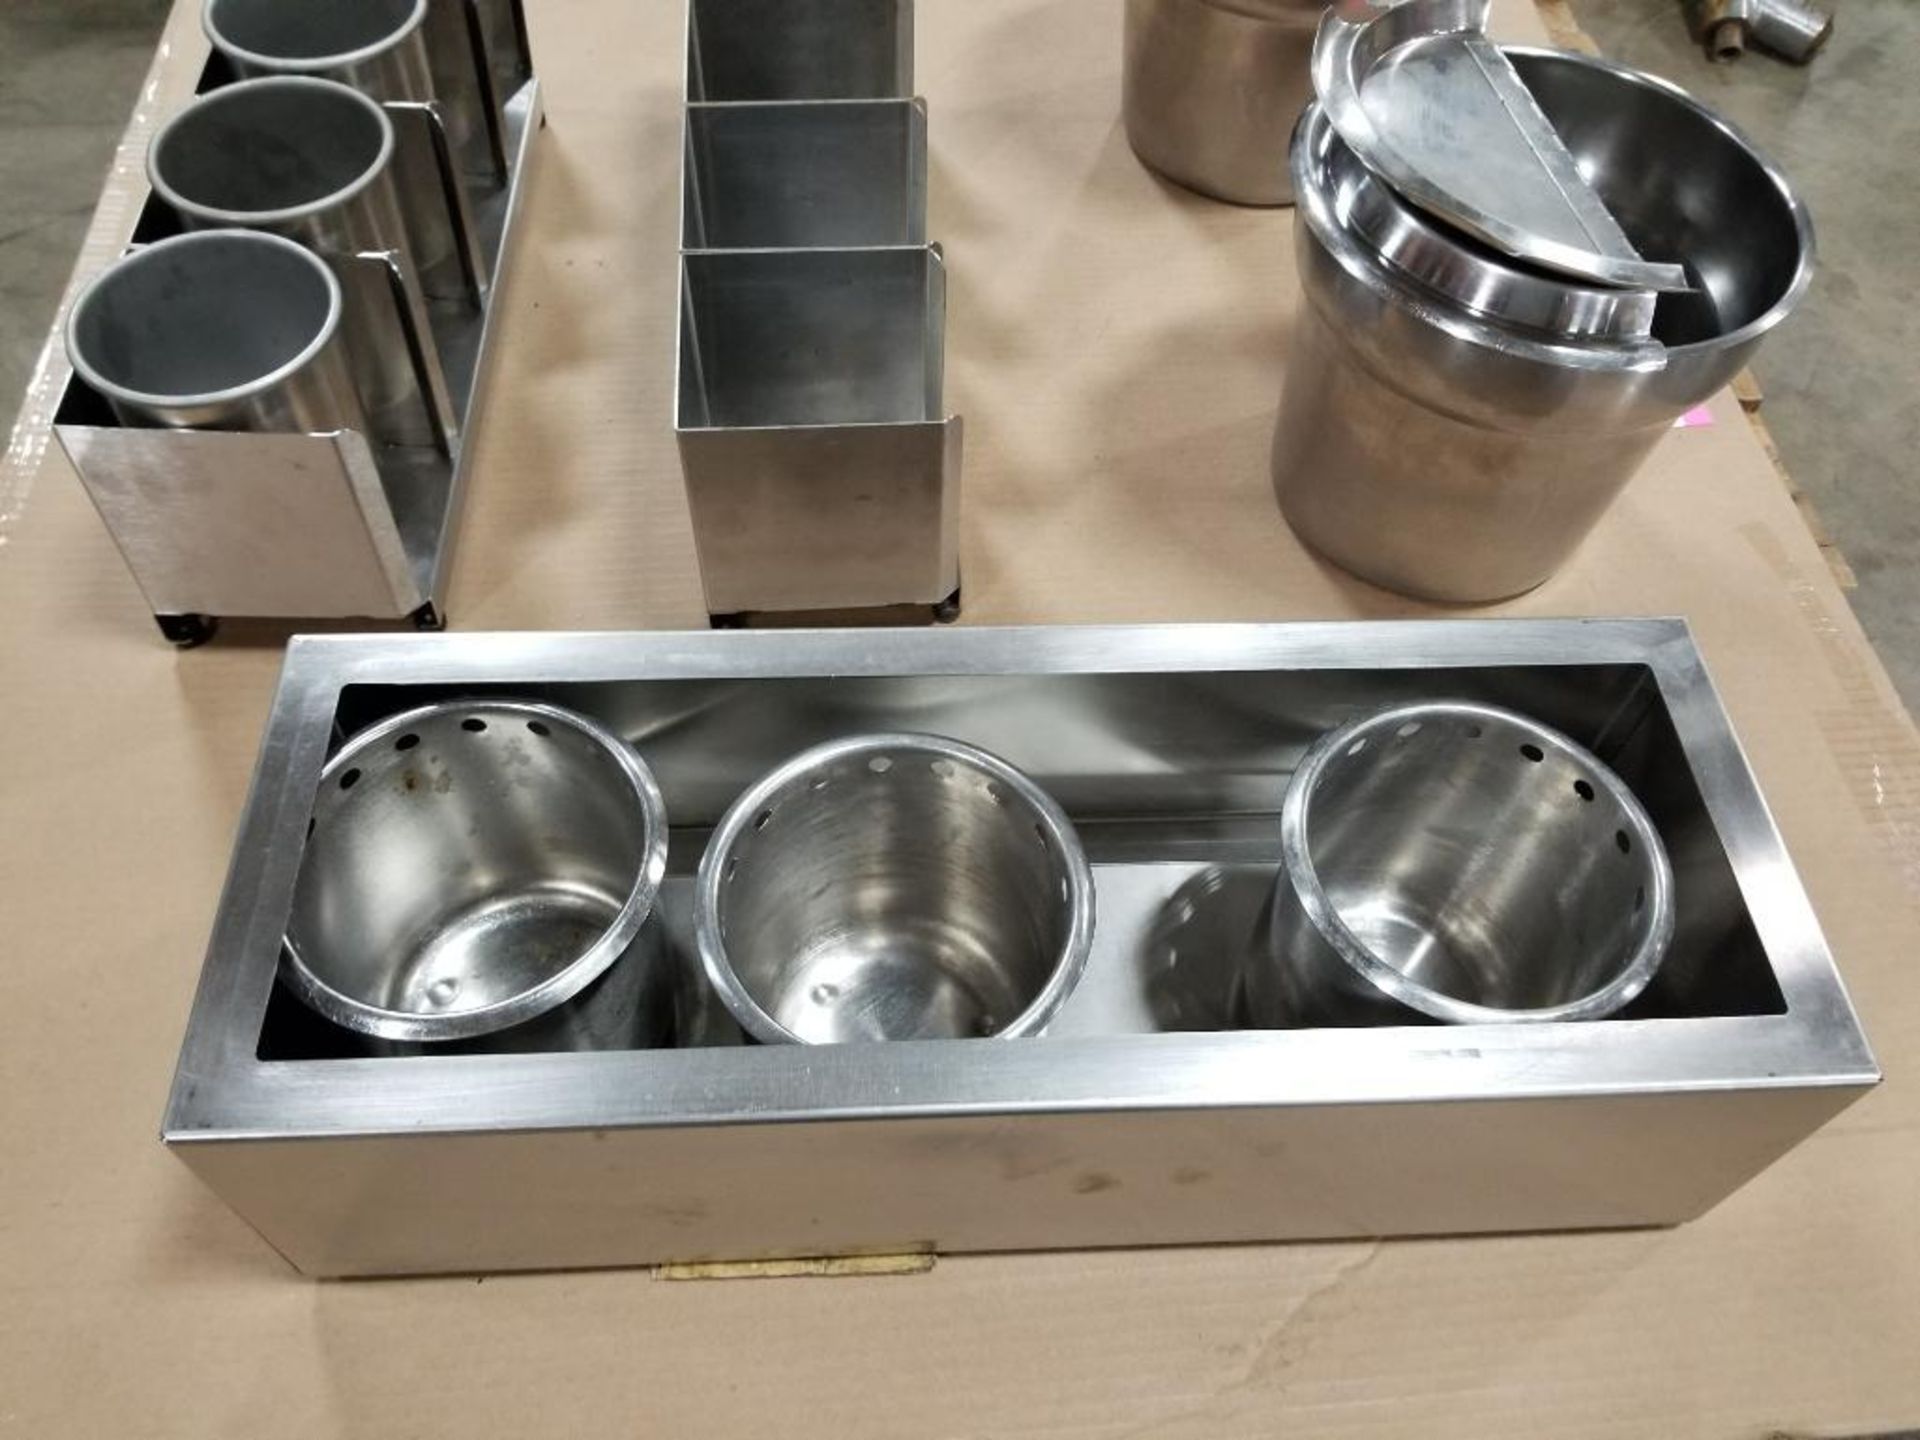 Stainless steel steam table and containers. - Image 4 of 16